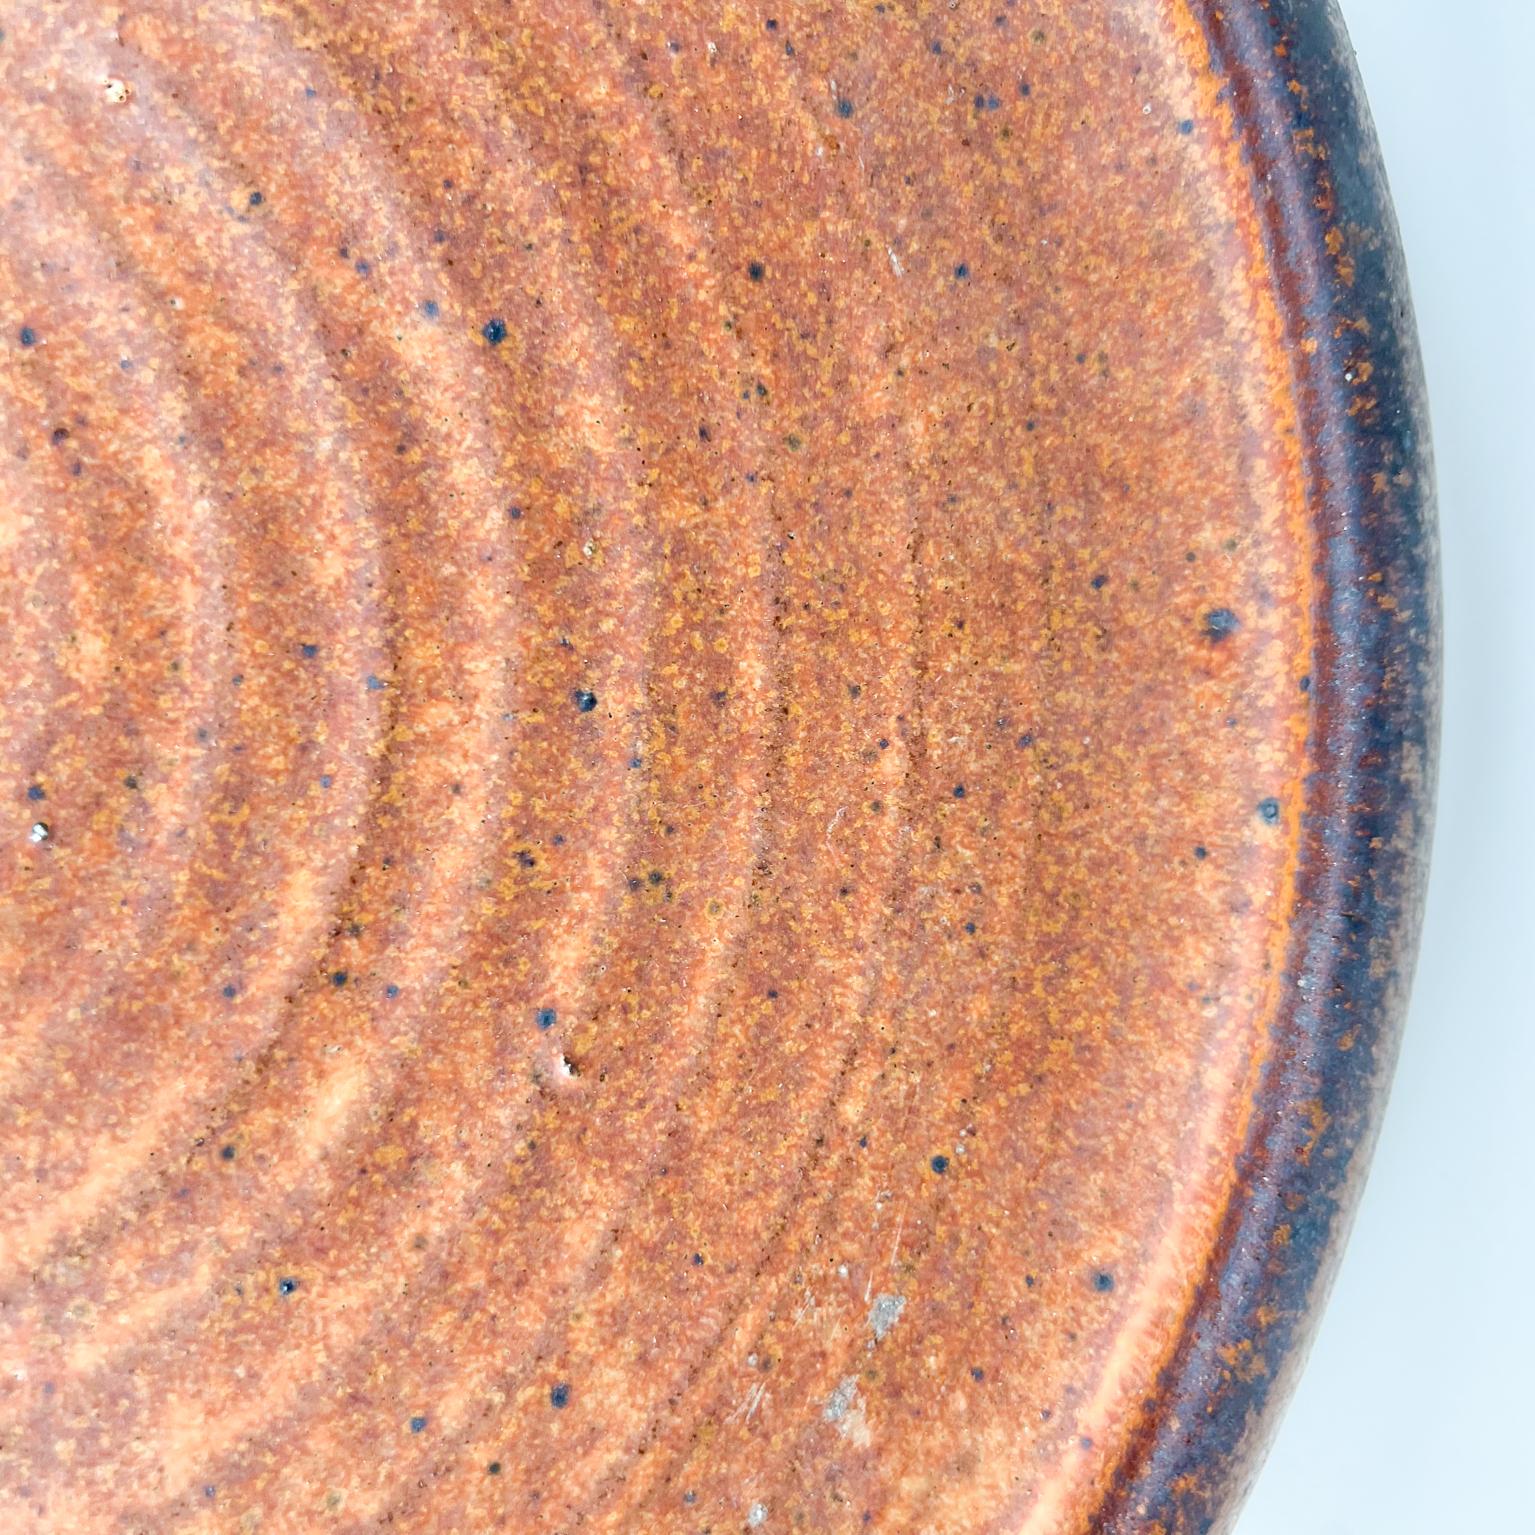 Modern 1980s Speckled Round Brown Stoneware Pottery Plate Artist Melching For Sale